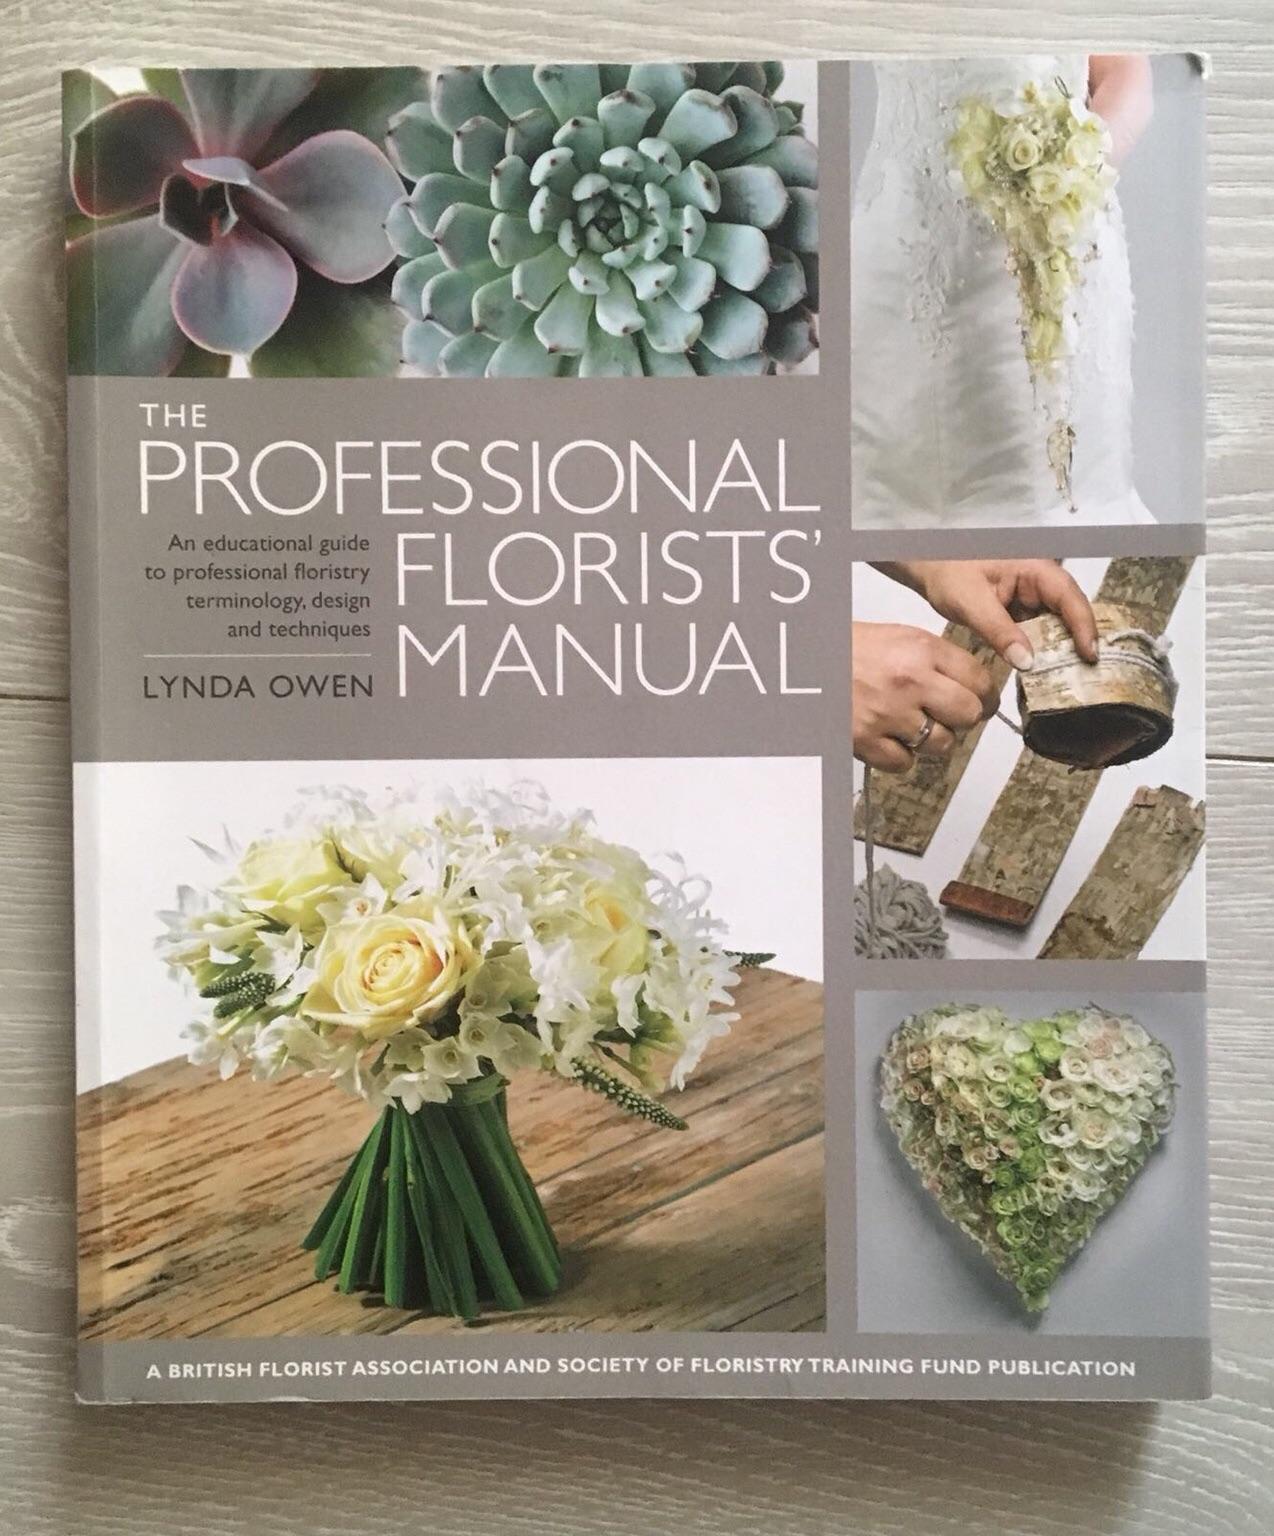 The Professional Florists Manual book in NE34 Tyneside for £25.00 for